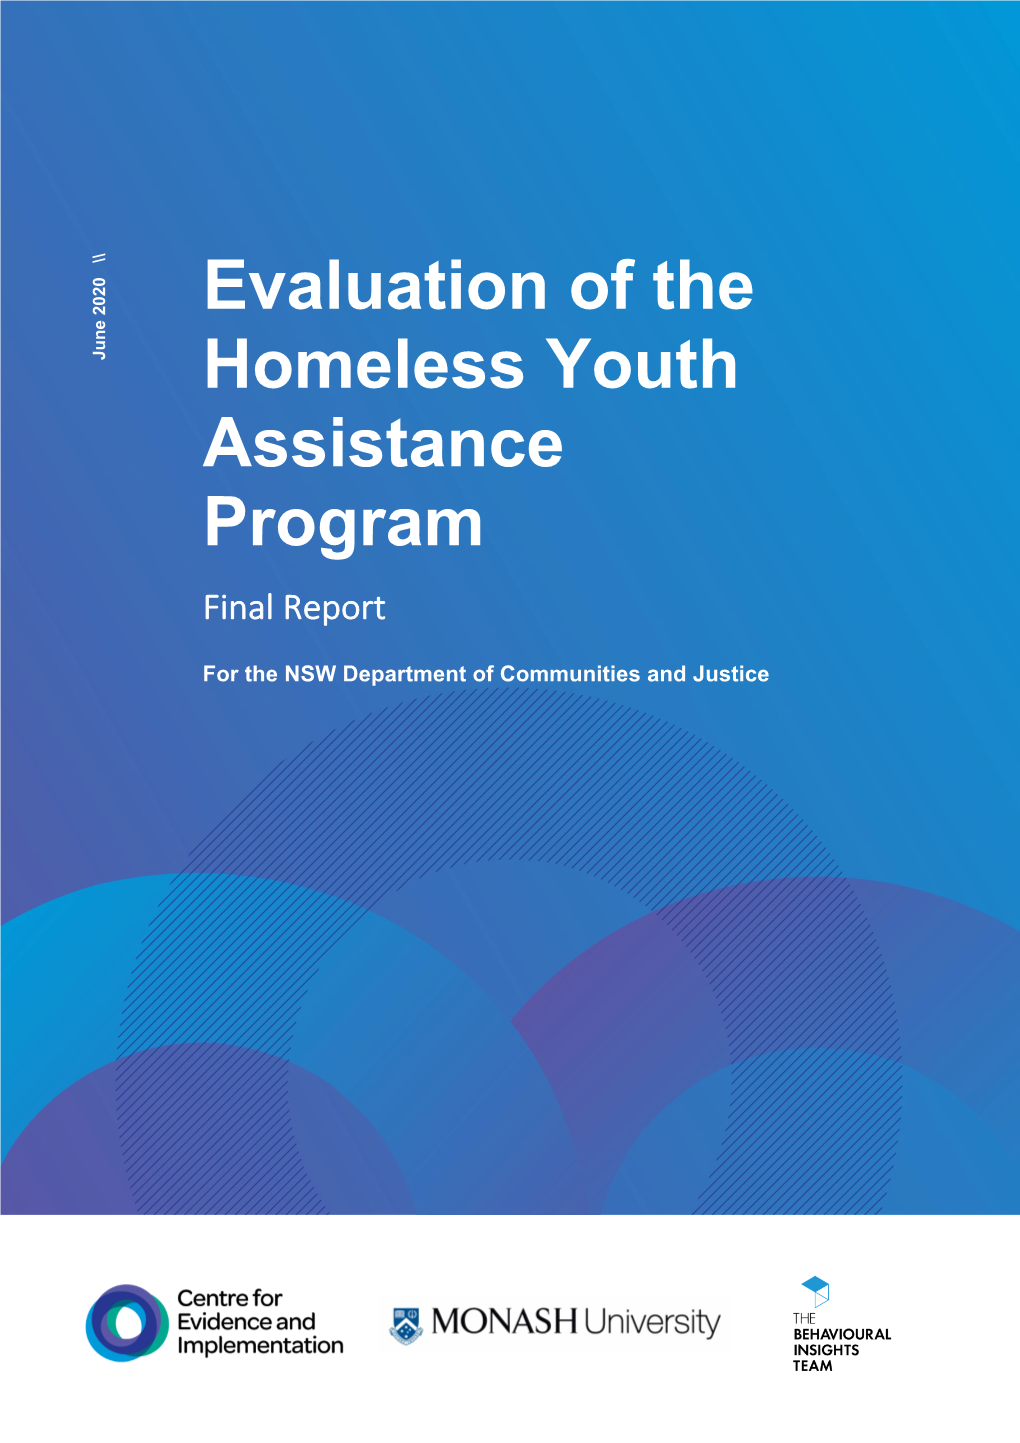 Evaluation of the Homeless Youth Assistance Program: Final Report, Centre for Evidence and Implementation, Sydney